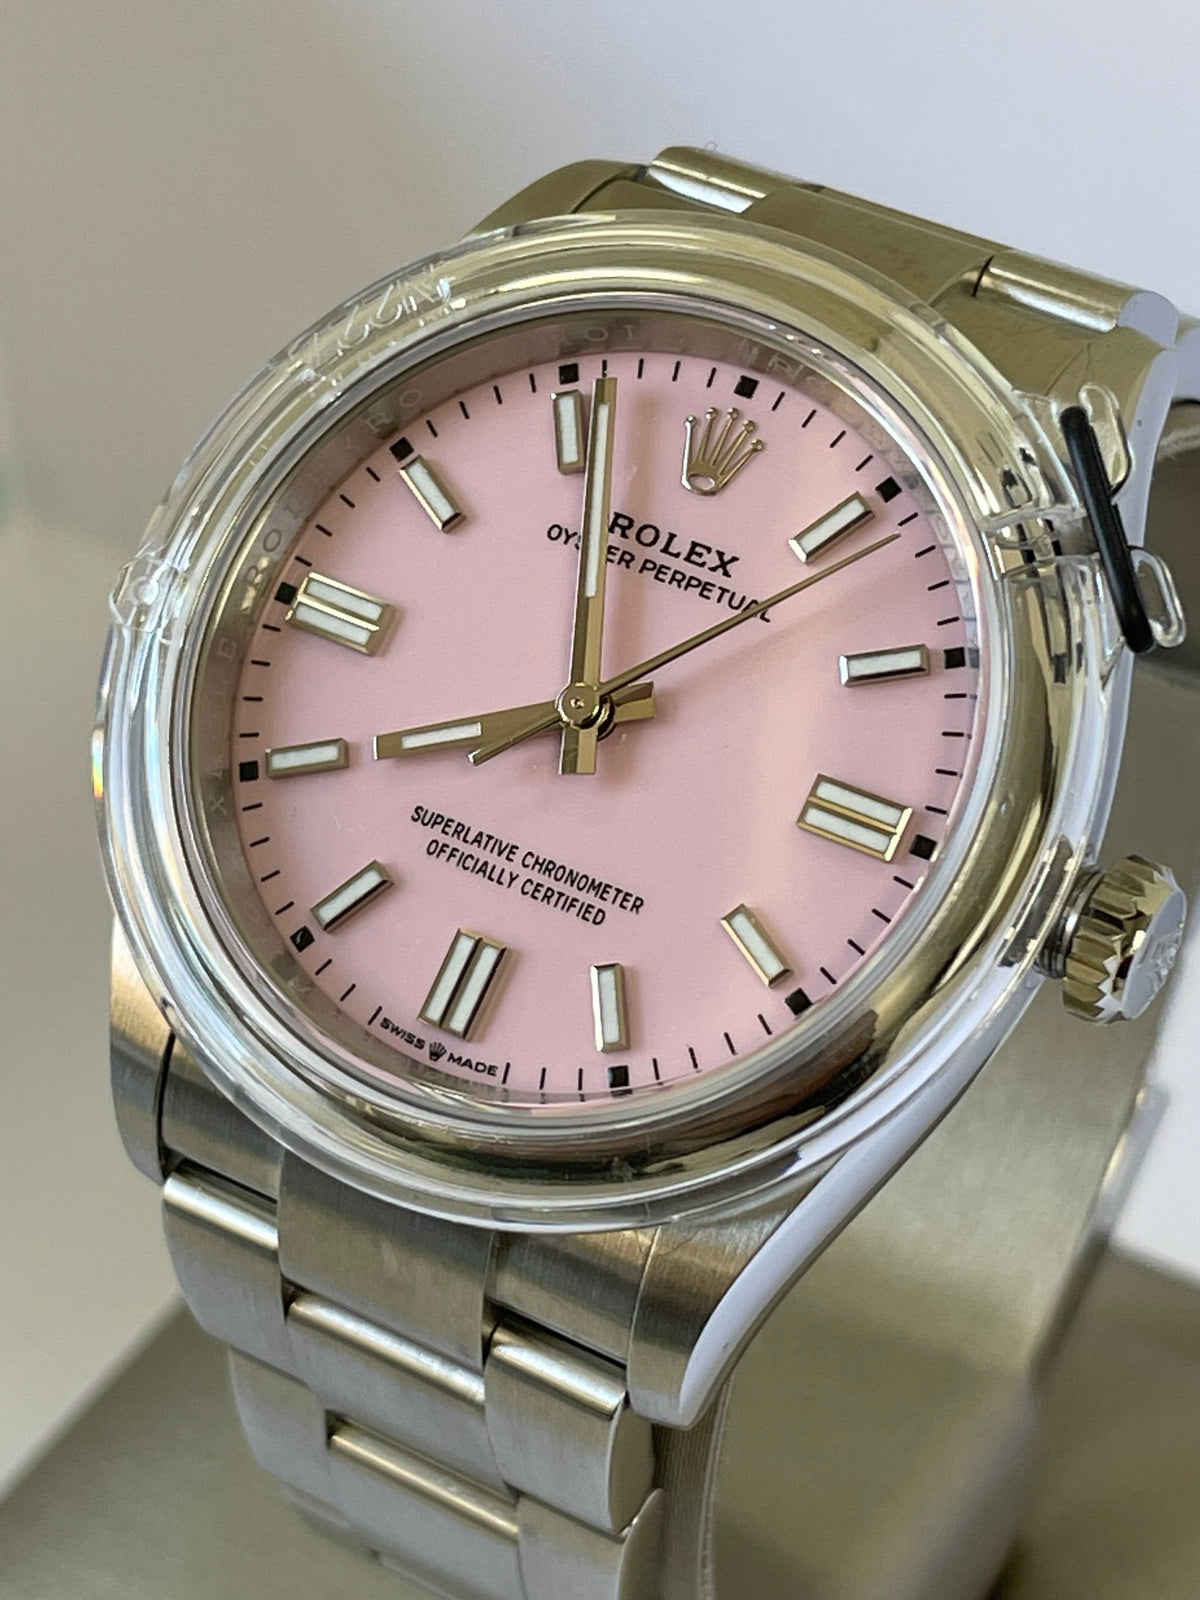 Rolex Oyster Perpetual 36 - 2022 - Domed Bezel - Candy Pink Index Dial - Oyster Bracelet - 126000